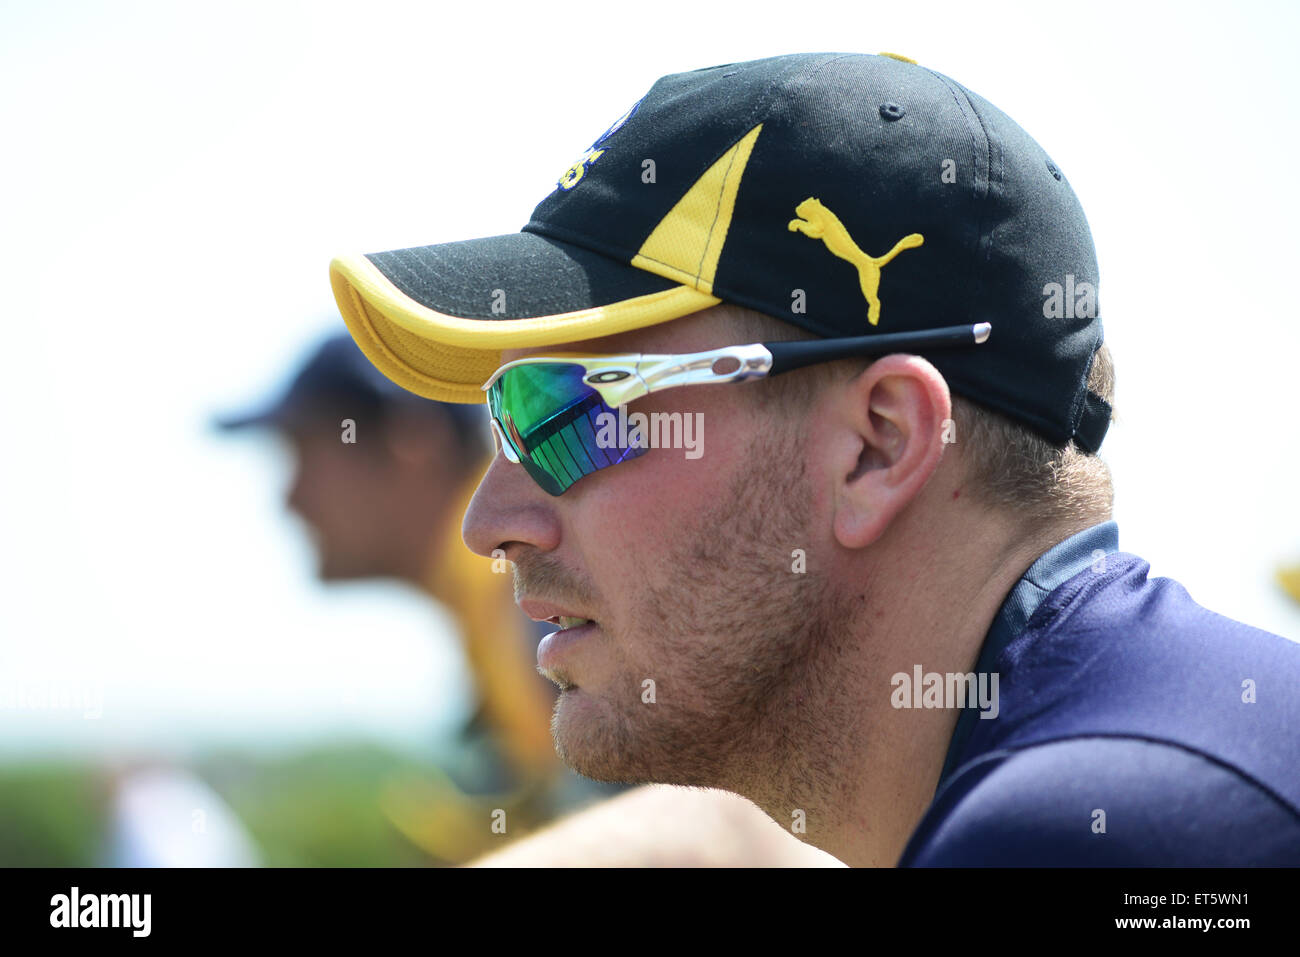 Australian cricketer Aaron Finch playing for Yorkshire Vikings. Picture: Scott Bairstow/Alamy Stock Photo